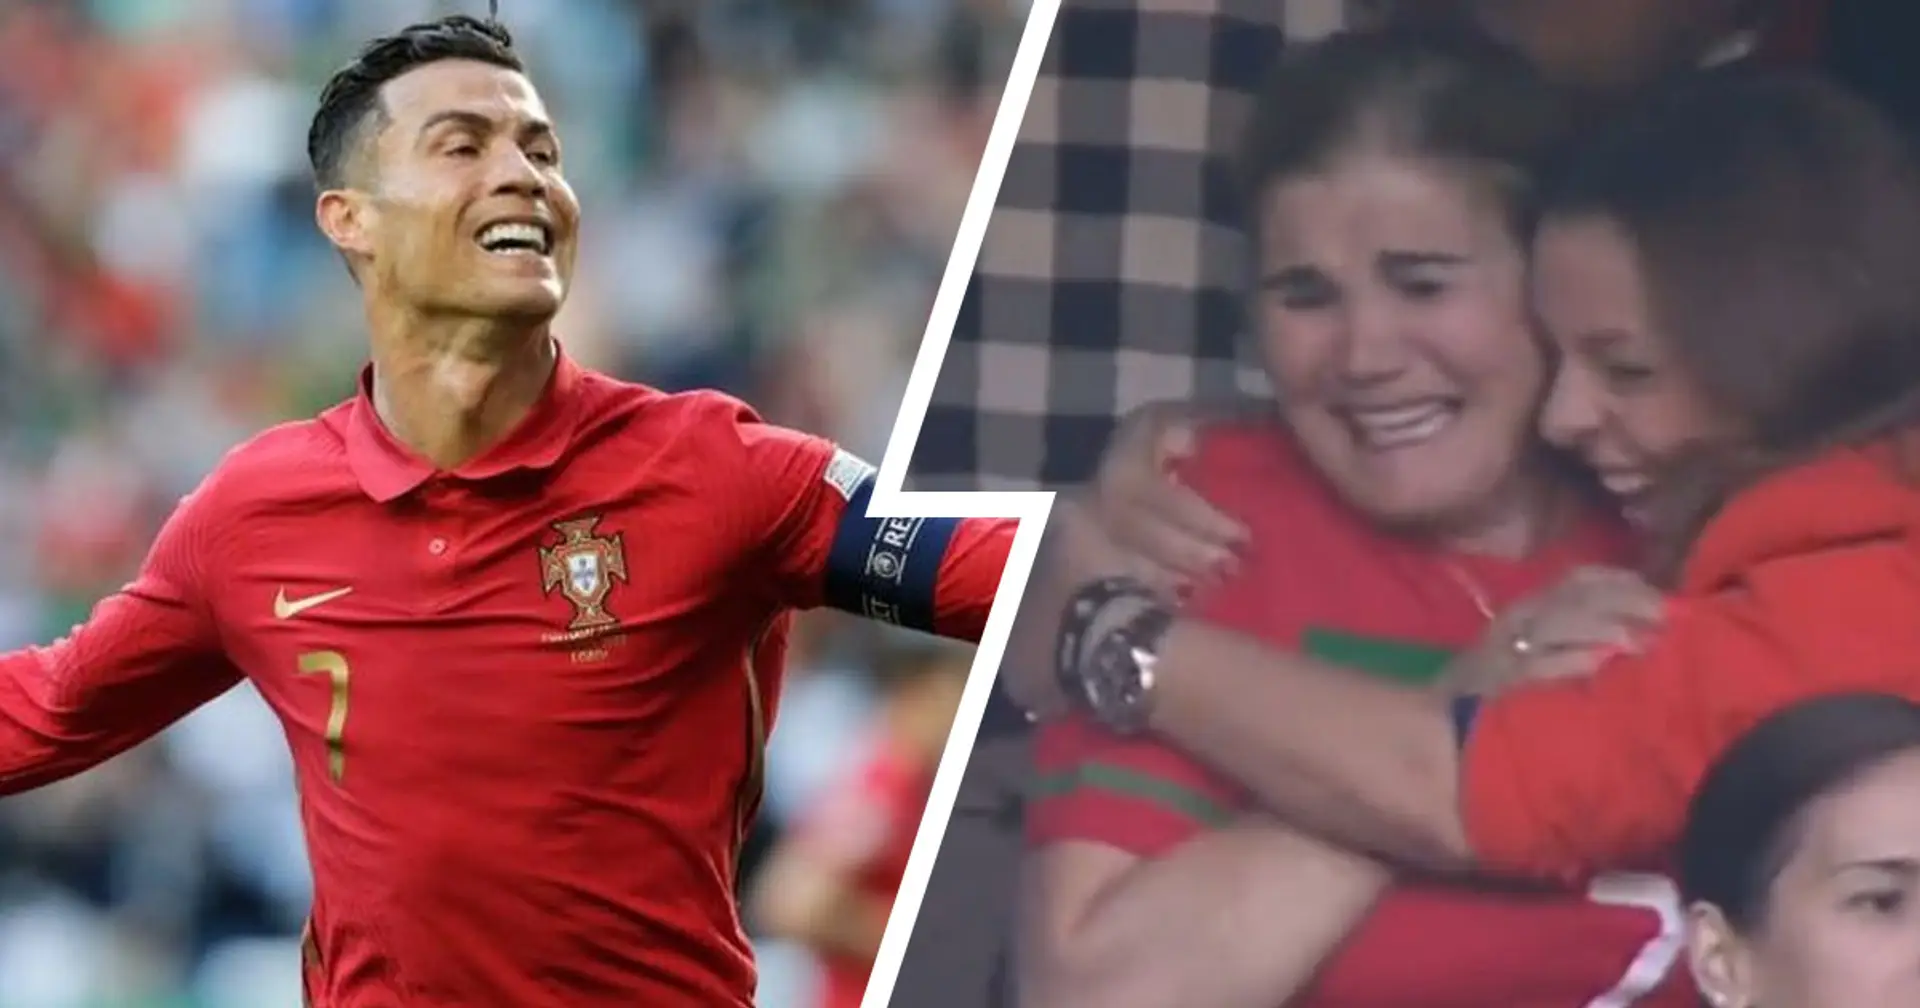 Caught on camera: Ronaldo's mother's emotional reaction to his goal vs Switzerland